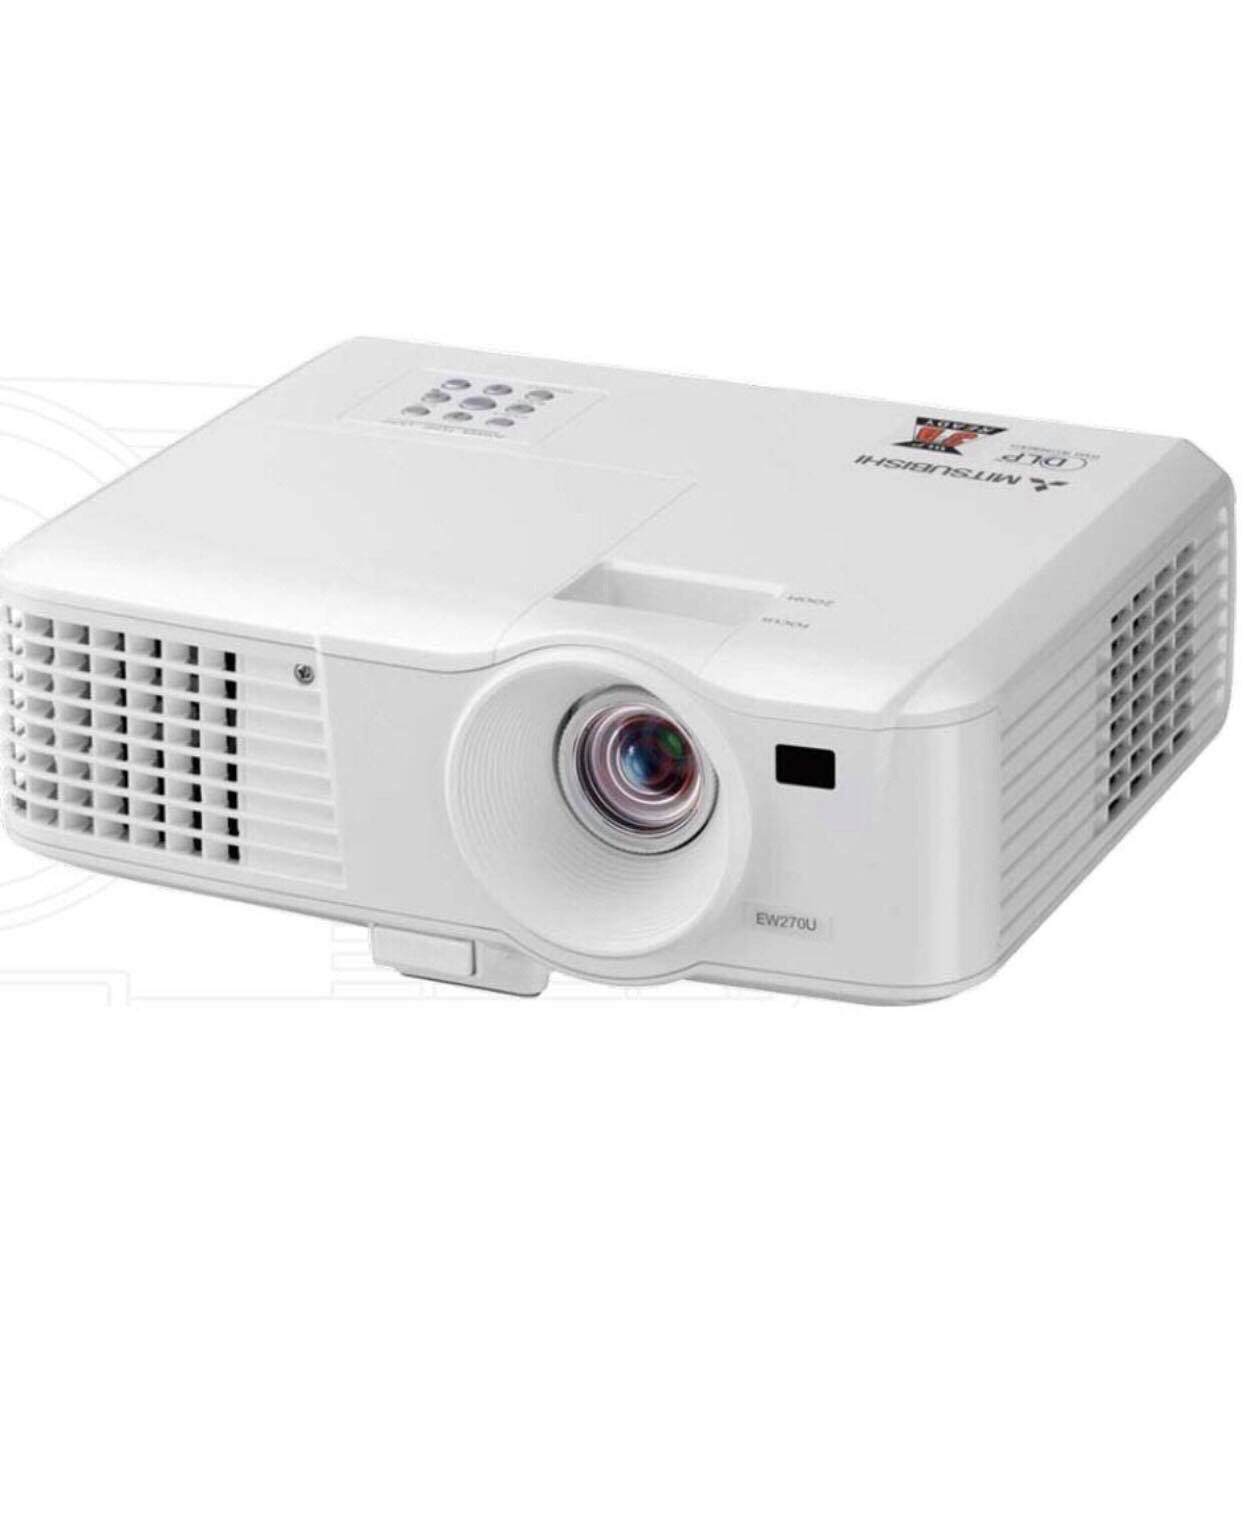 Mitsubishi 3D Ready HD Projector with Internal Speakers & HDMI